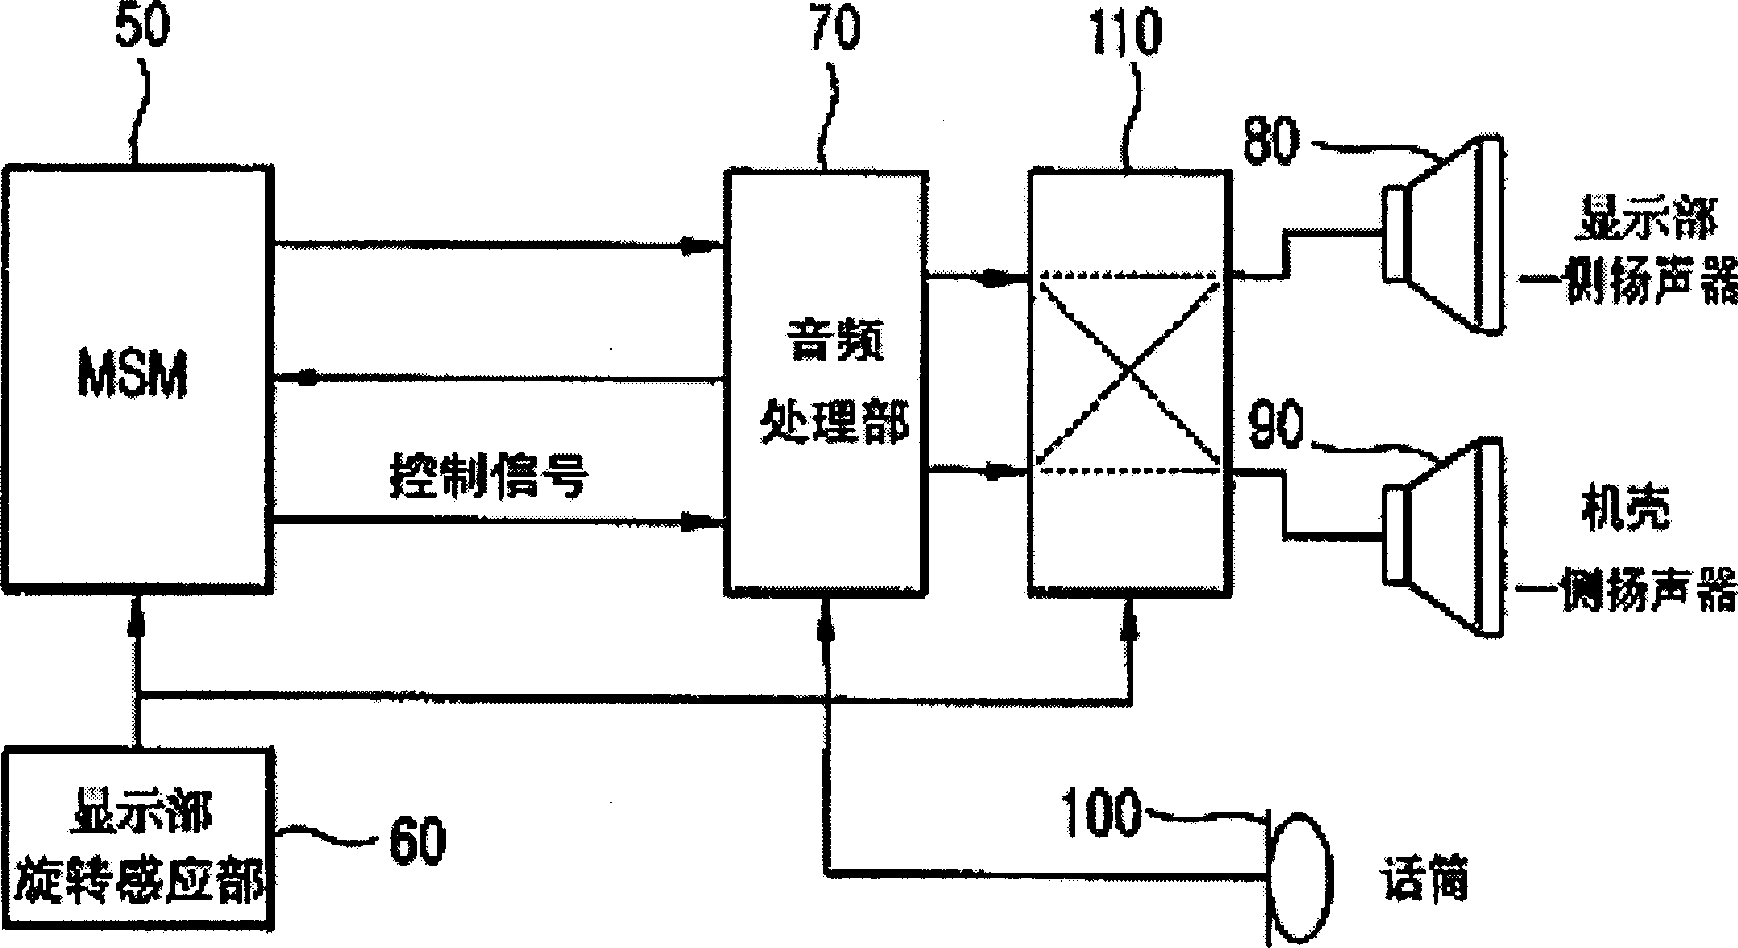 Audio output device of rotary turn-lid type communication terminal